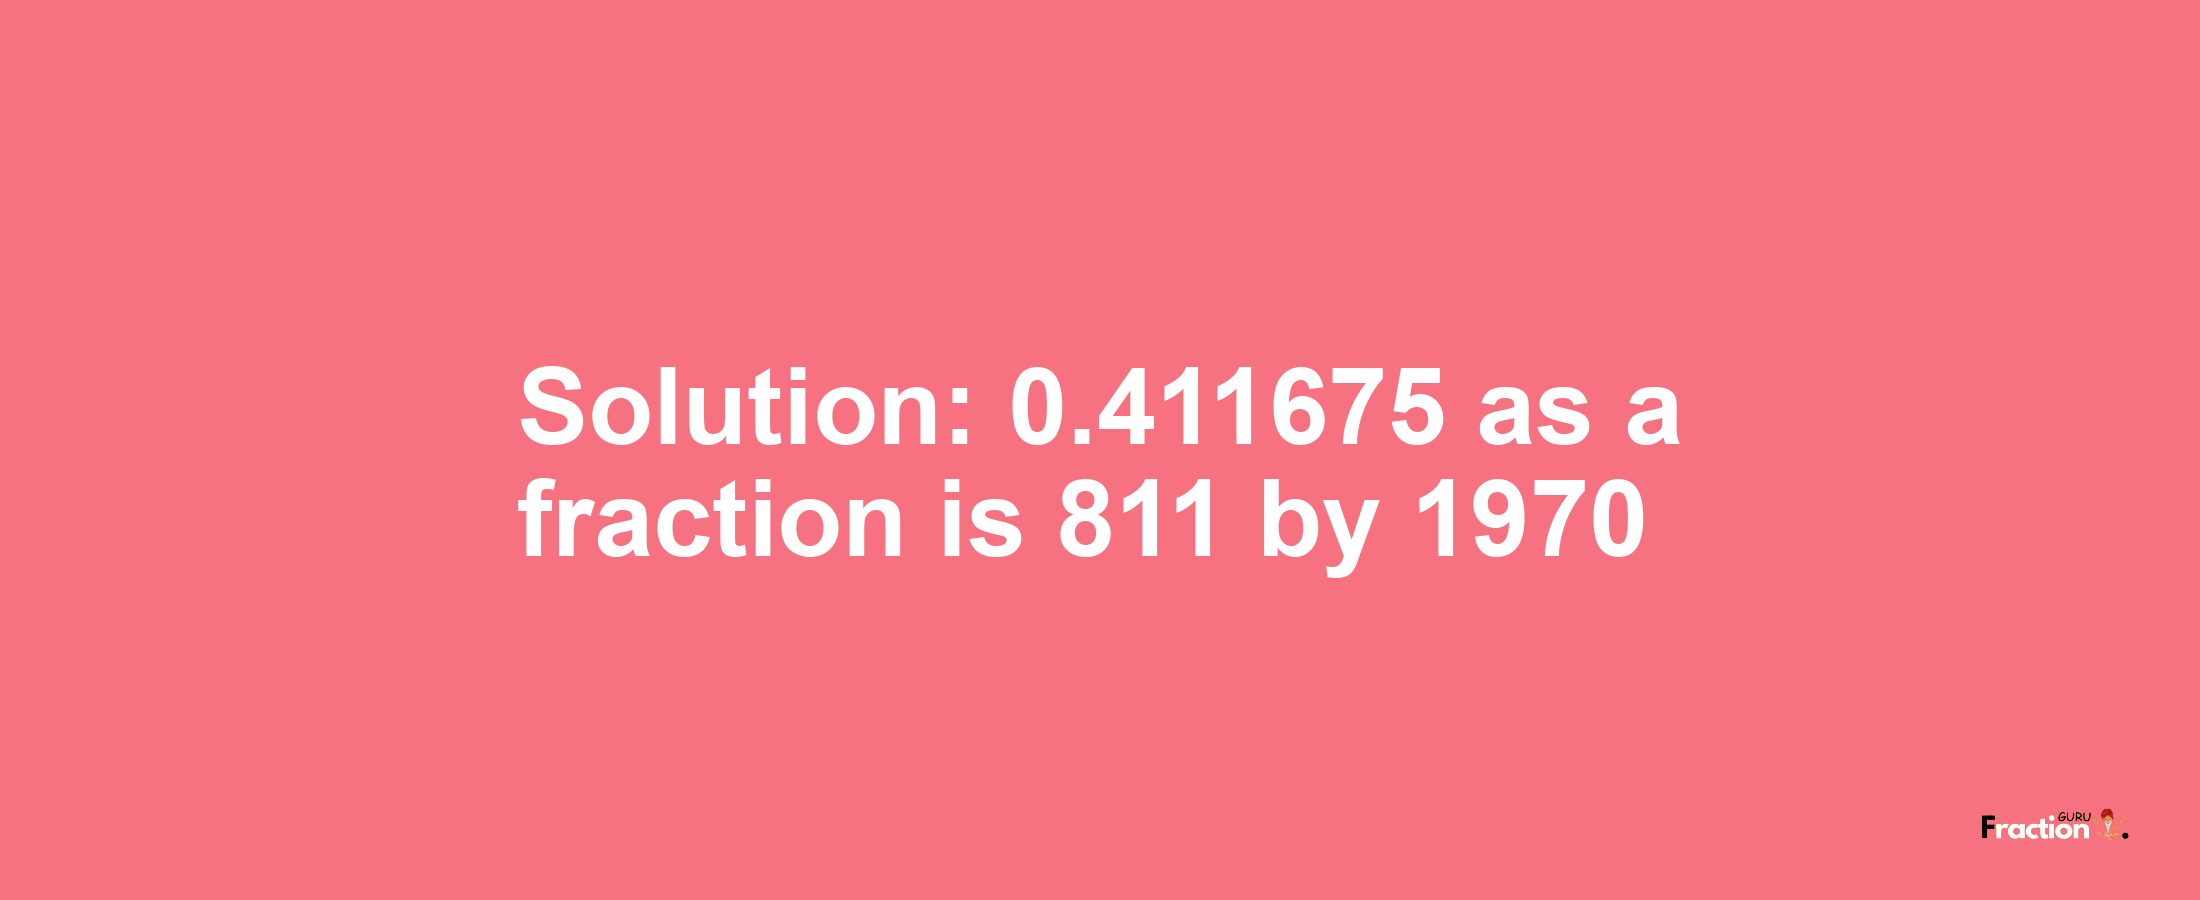 Solution:0.411675 as a fraction is 811/1970